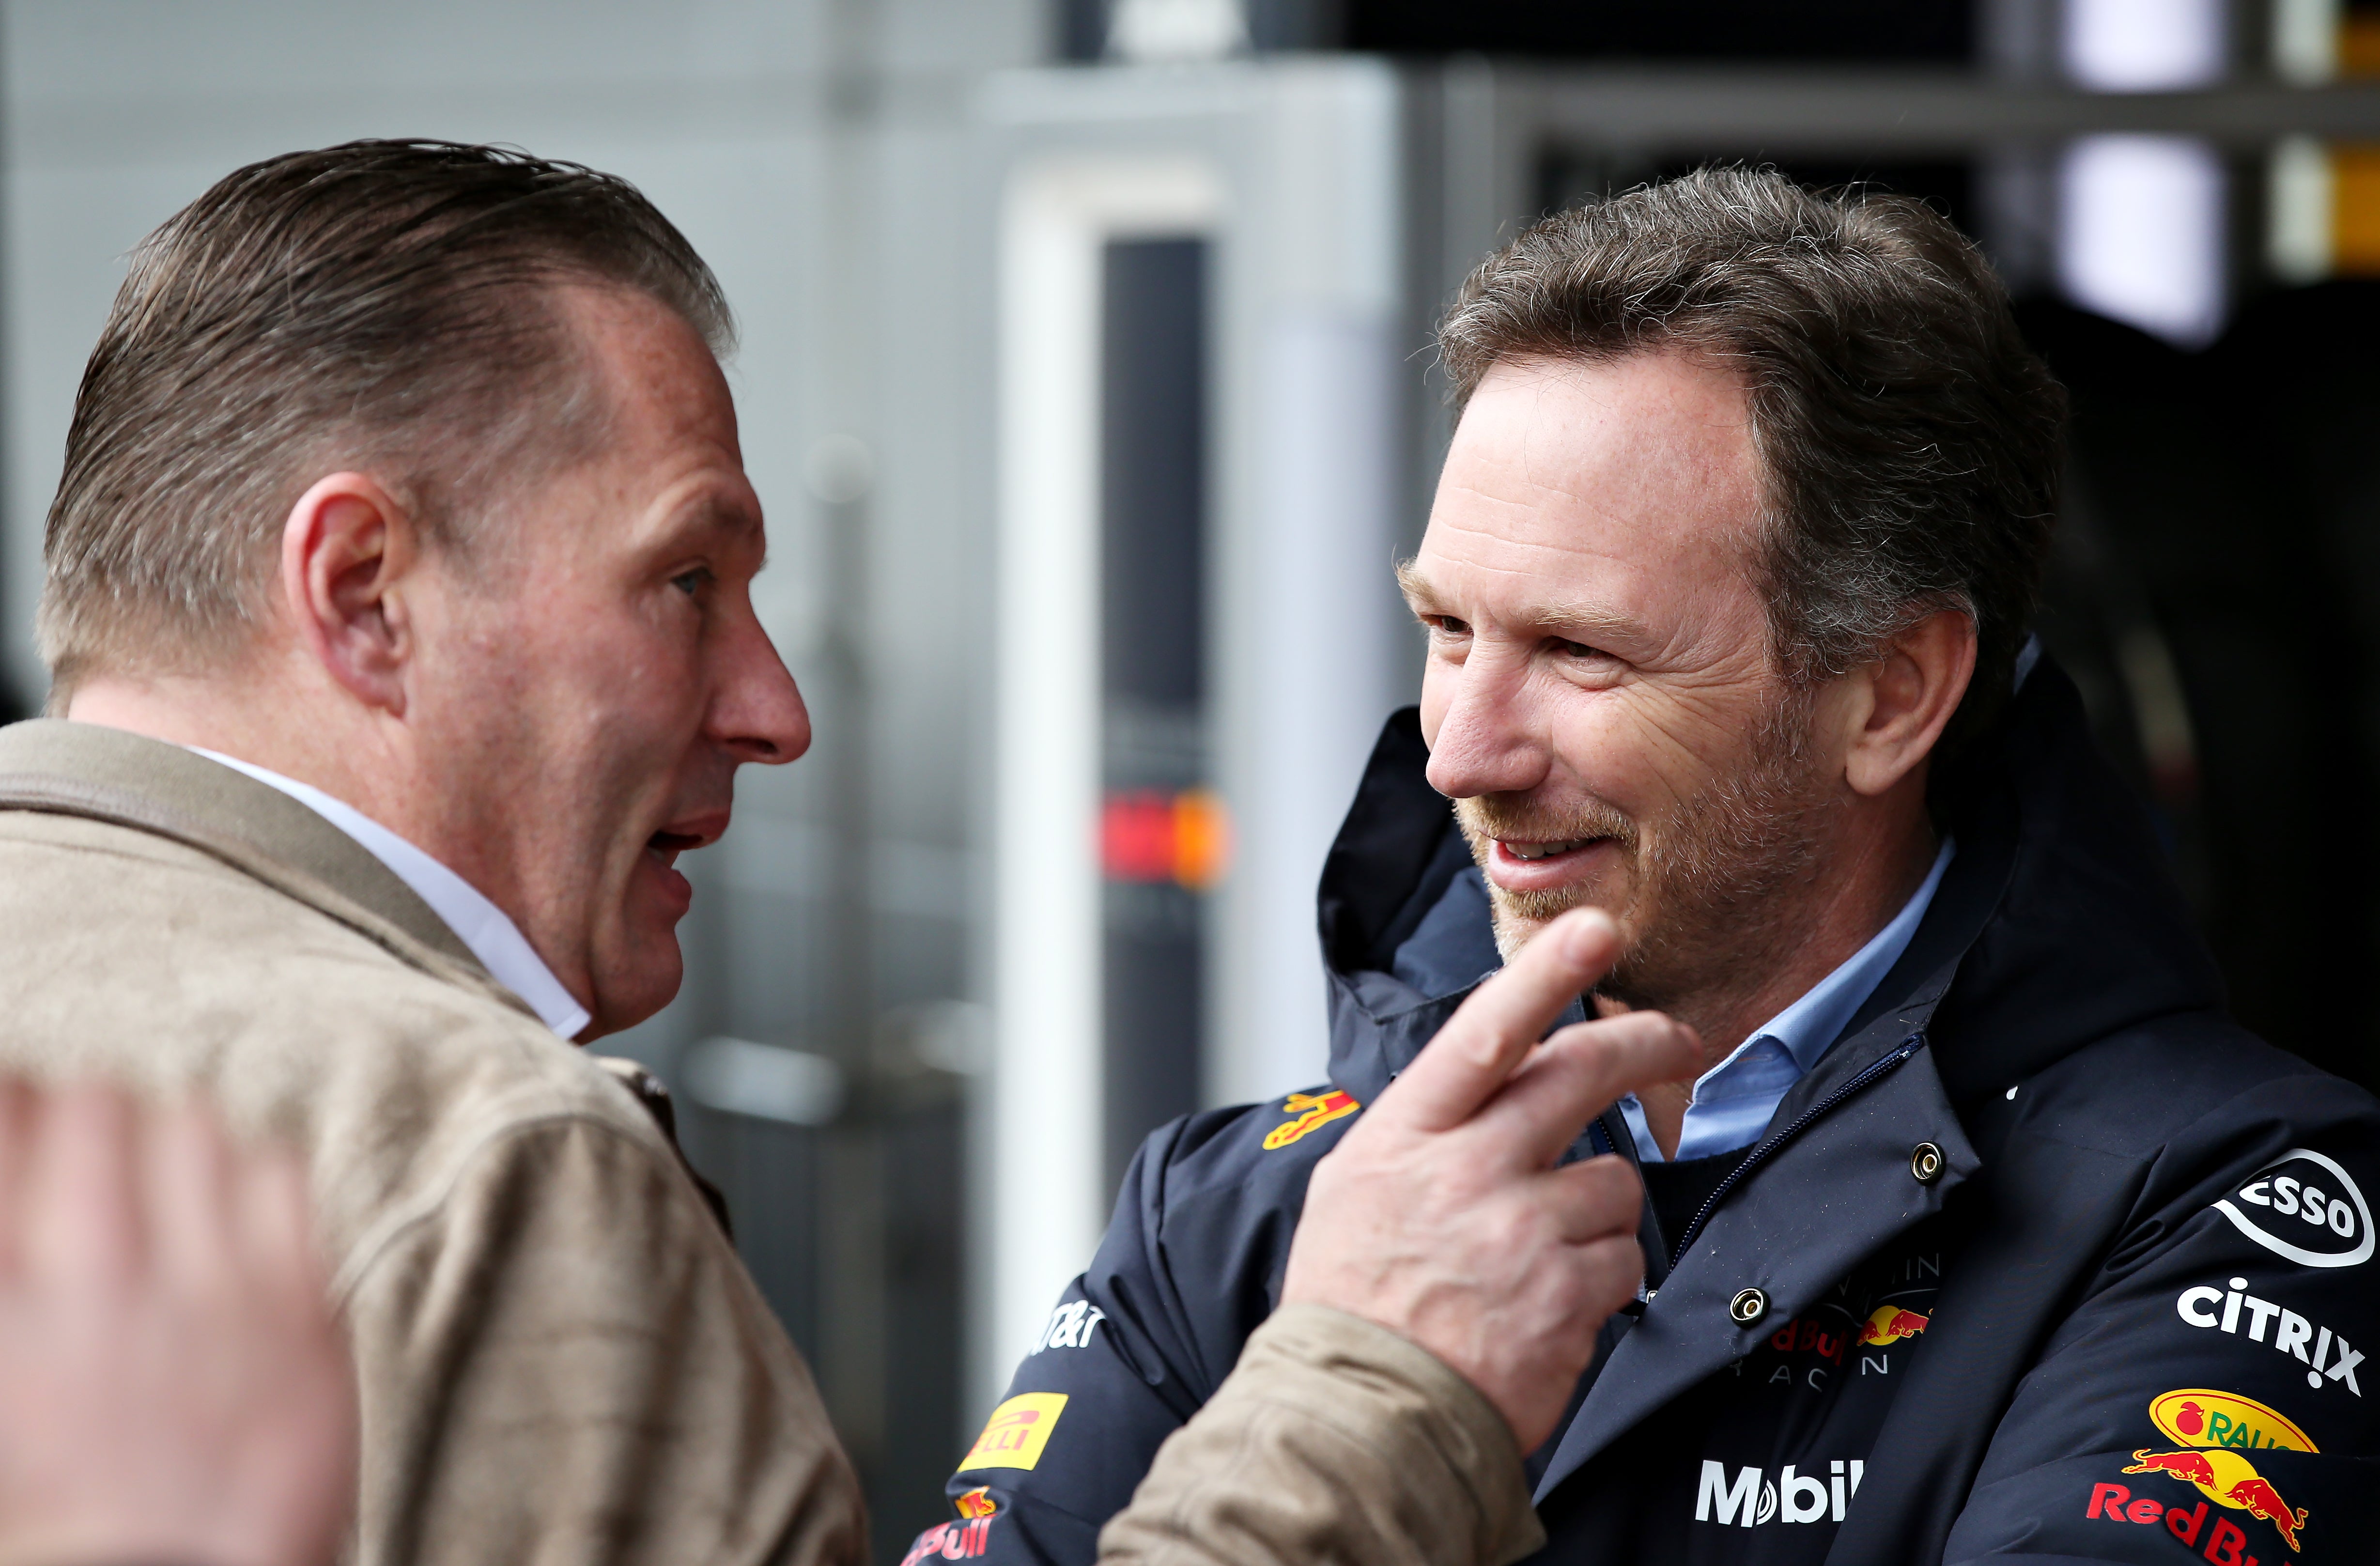 lando norris, martin brundle, christian horner, george russell, max verstappen, martin brundle suggests horner’s ‘ridiculous spat’ with verstappen’s father impacted crash with norris